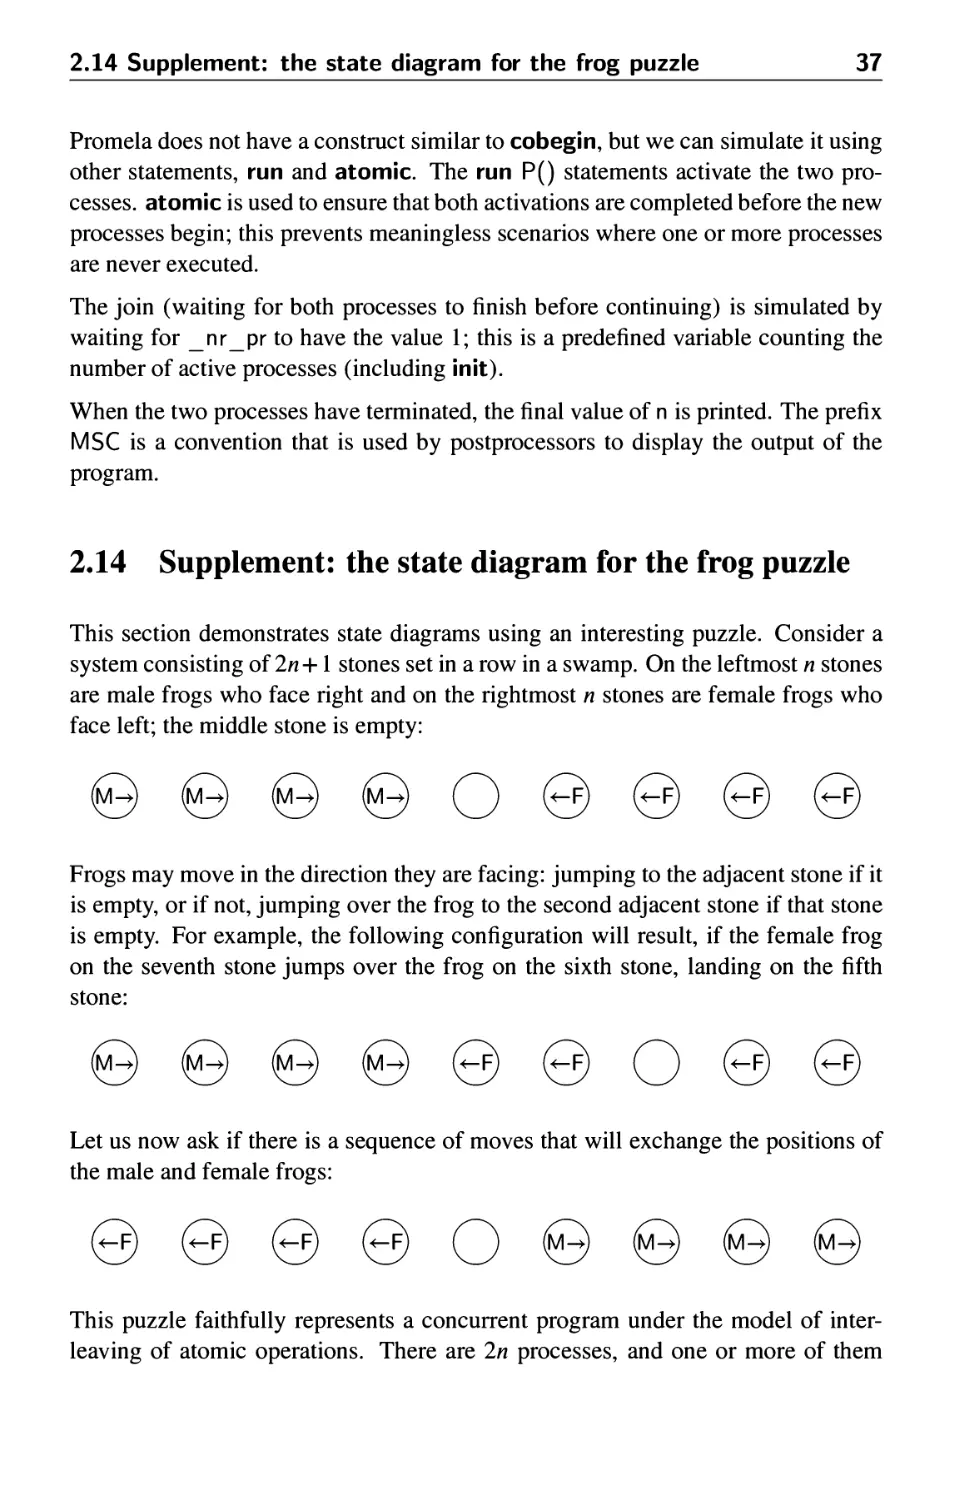 2.14 Supplement: the state diagram for the frog puzzle